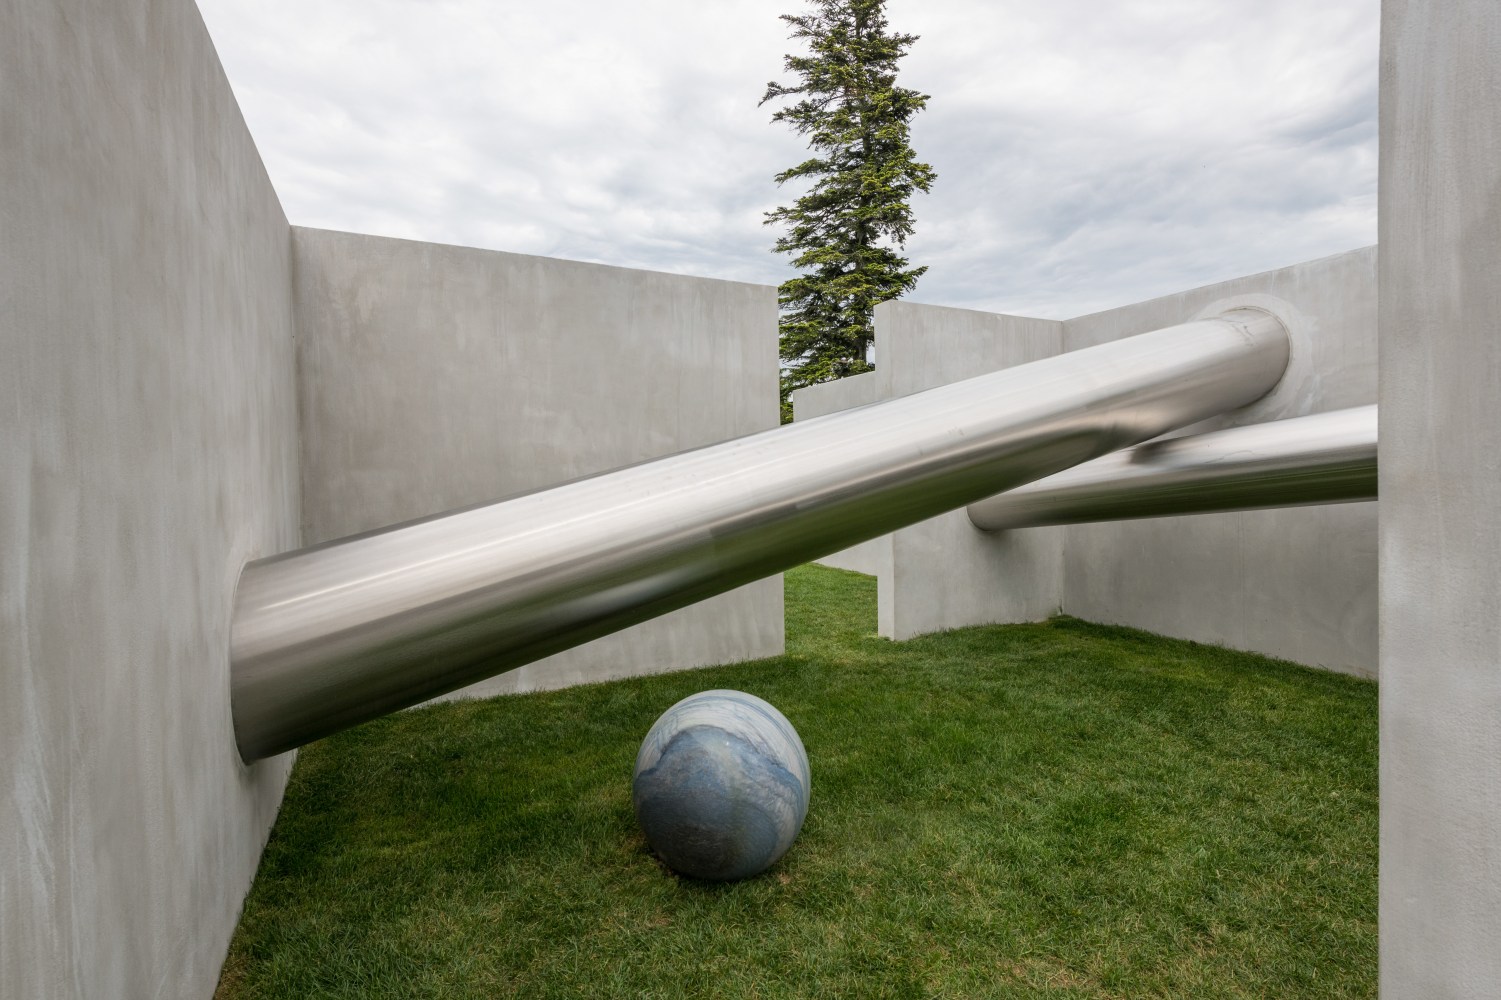 Alicja Kwade
TunnelTeller, 2018
Stainless steel, concrete, natural stone (Macauba azul)
Site specific installation for The Trustees&amp;rsquo; Castle Hill on the Crane Estate
Photo: Peter Vanderwarker Photography